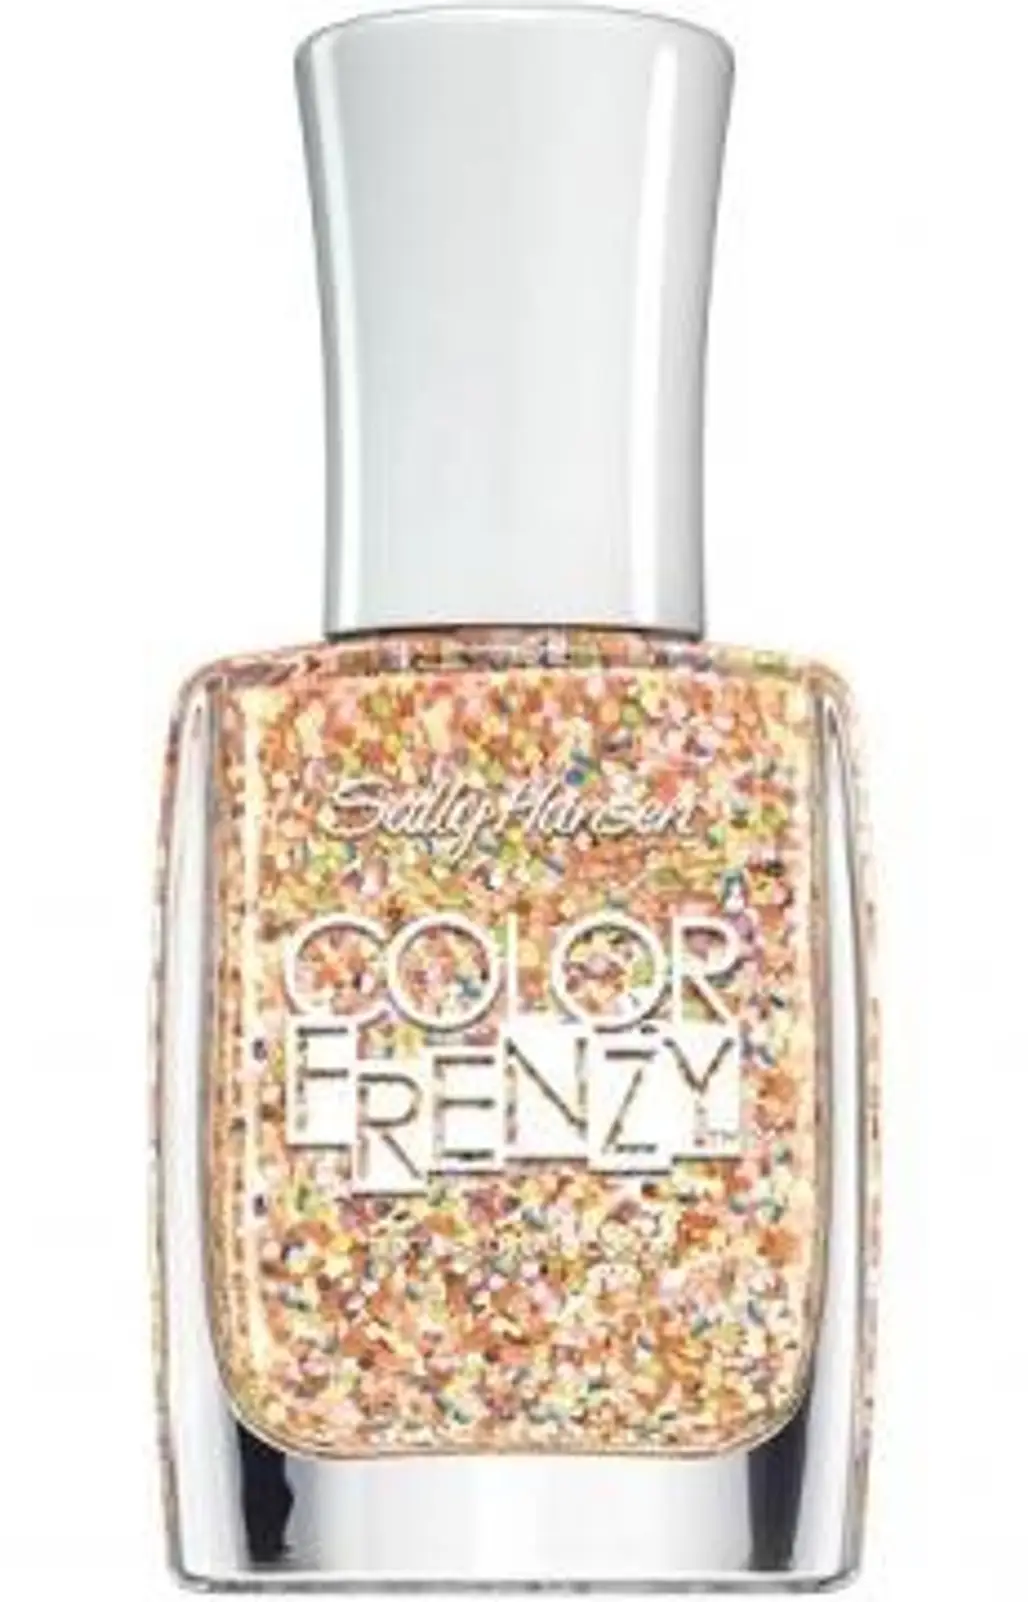 Sally Hansen Color Frenzy (Limited Edition)